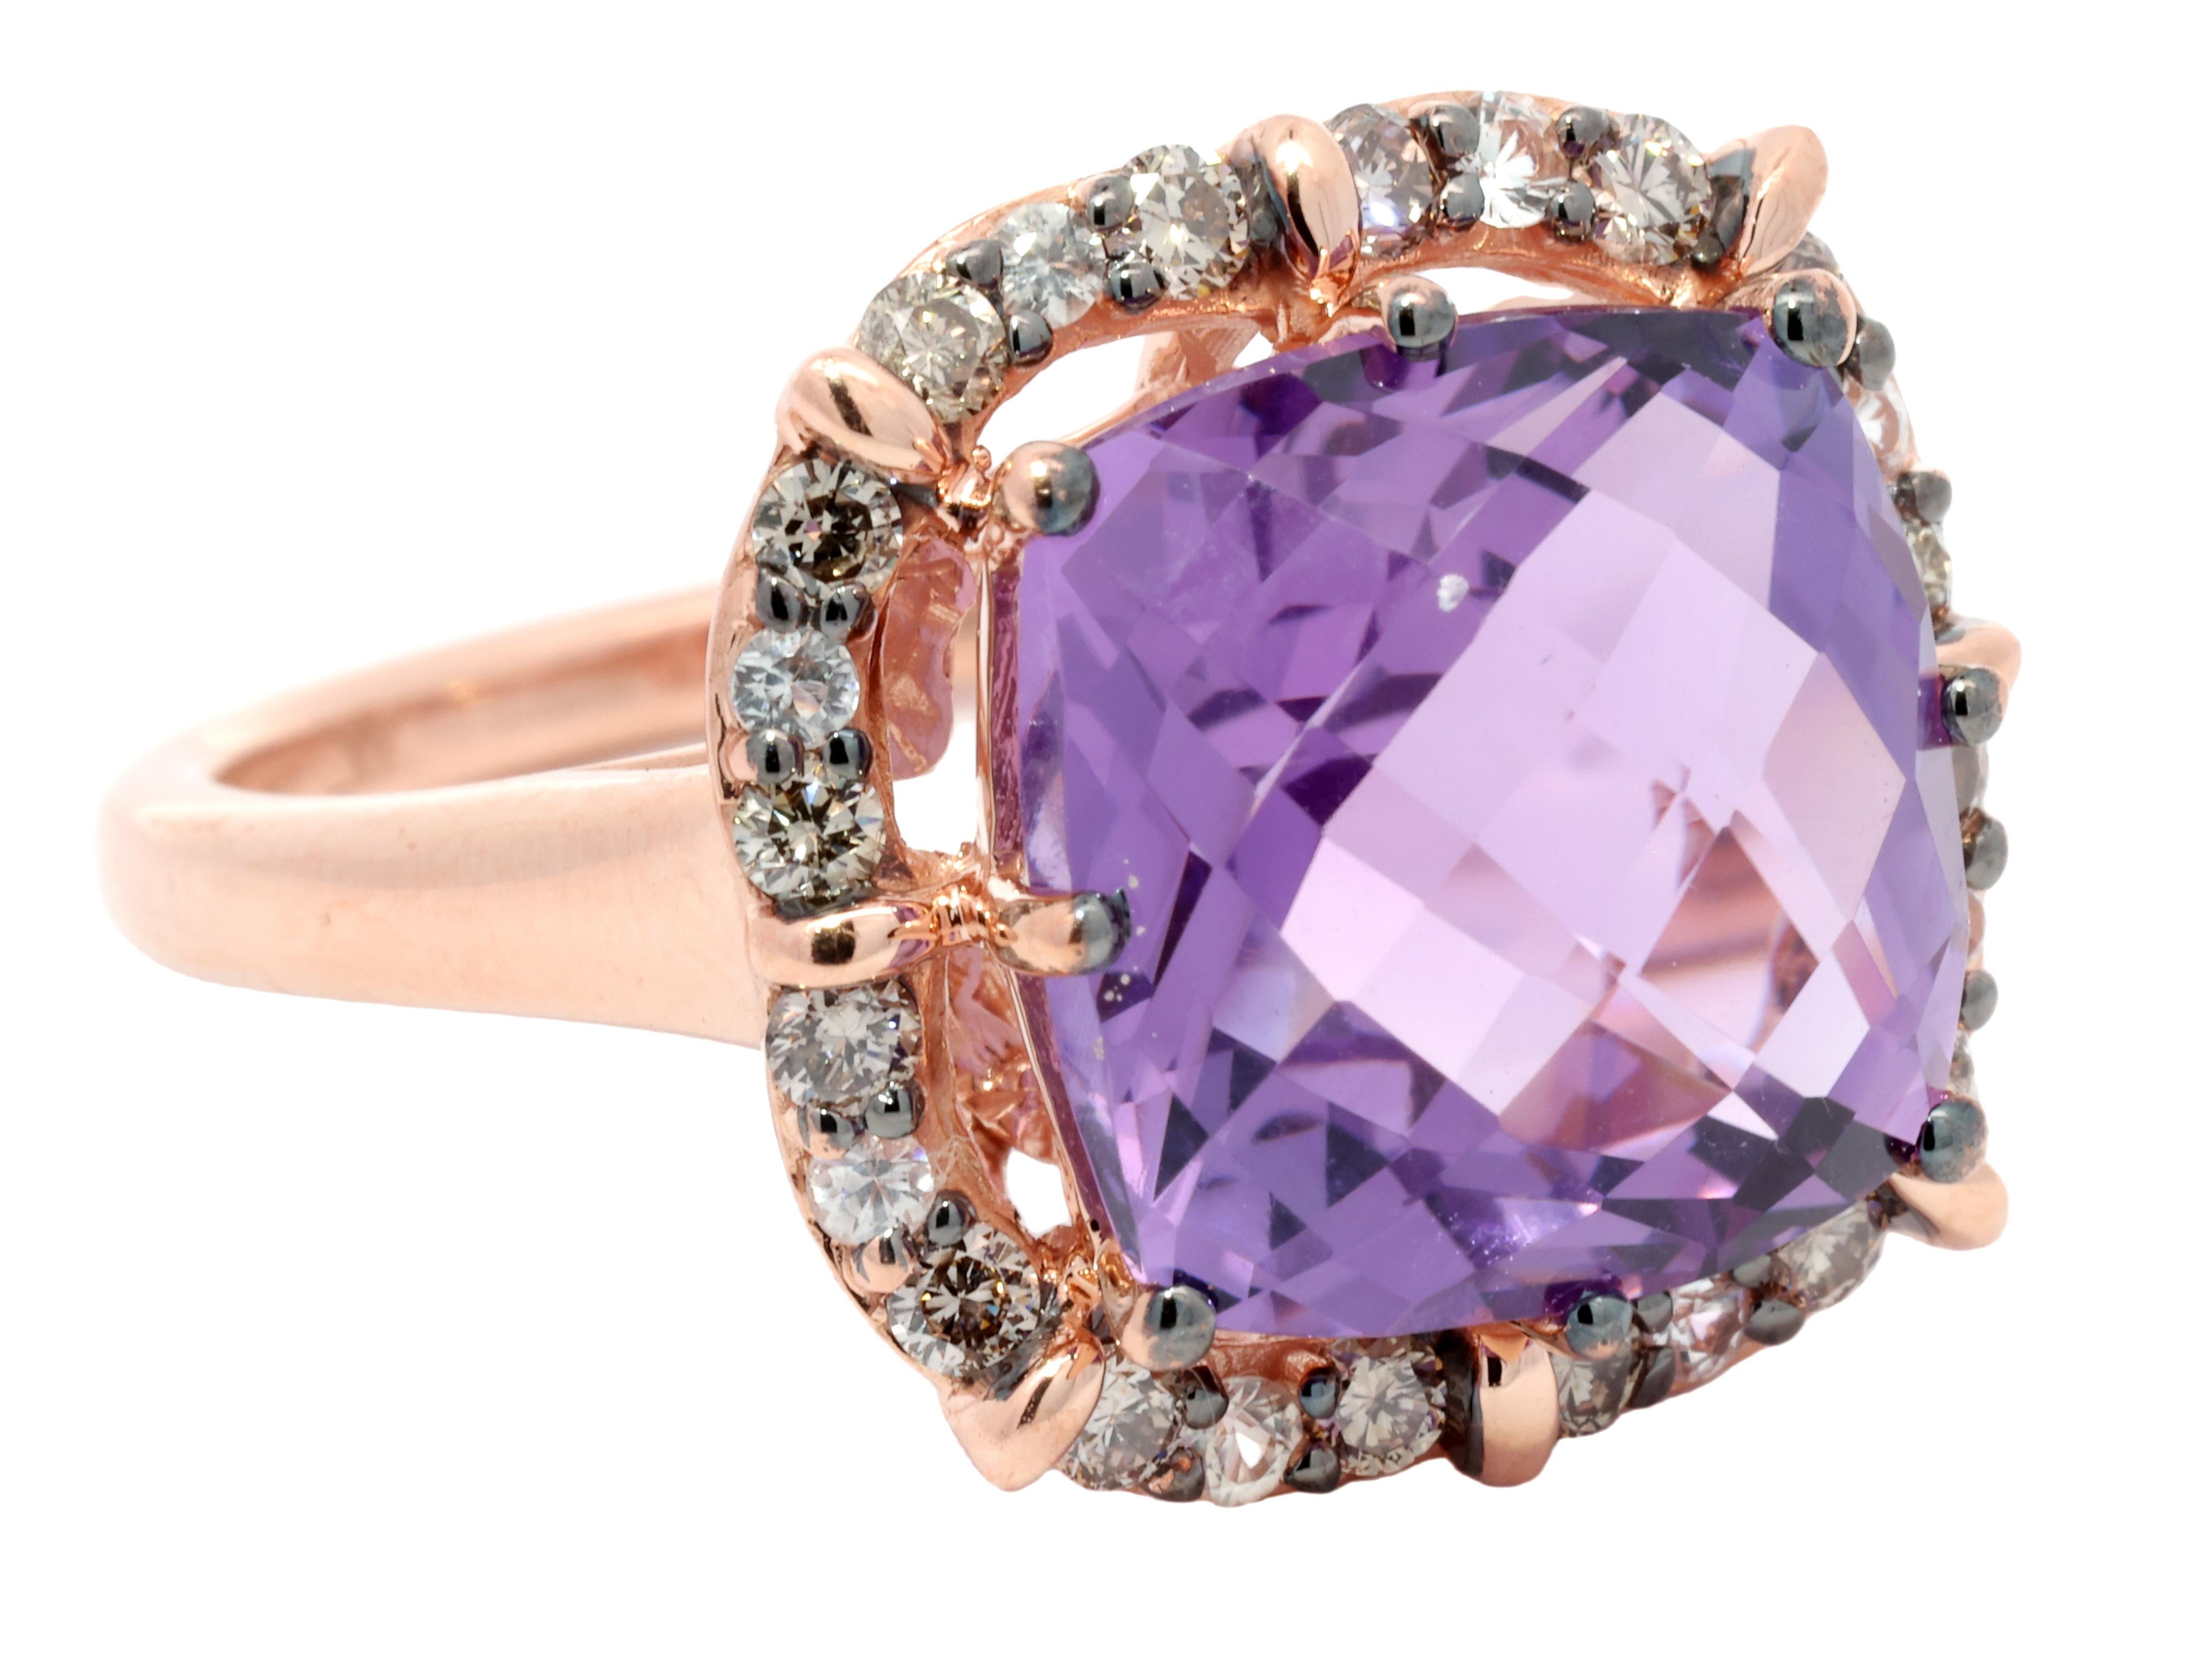 Ring Size: 7.25

Elevate your fine jewelry collection with the exquisite allure of our Roberto Ricci amethyst cocktail ring. Crafted in luxurious 14k rose gold, this stunning designer piece is a harmonious blend of luxury and elegance.

At the heart